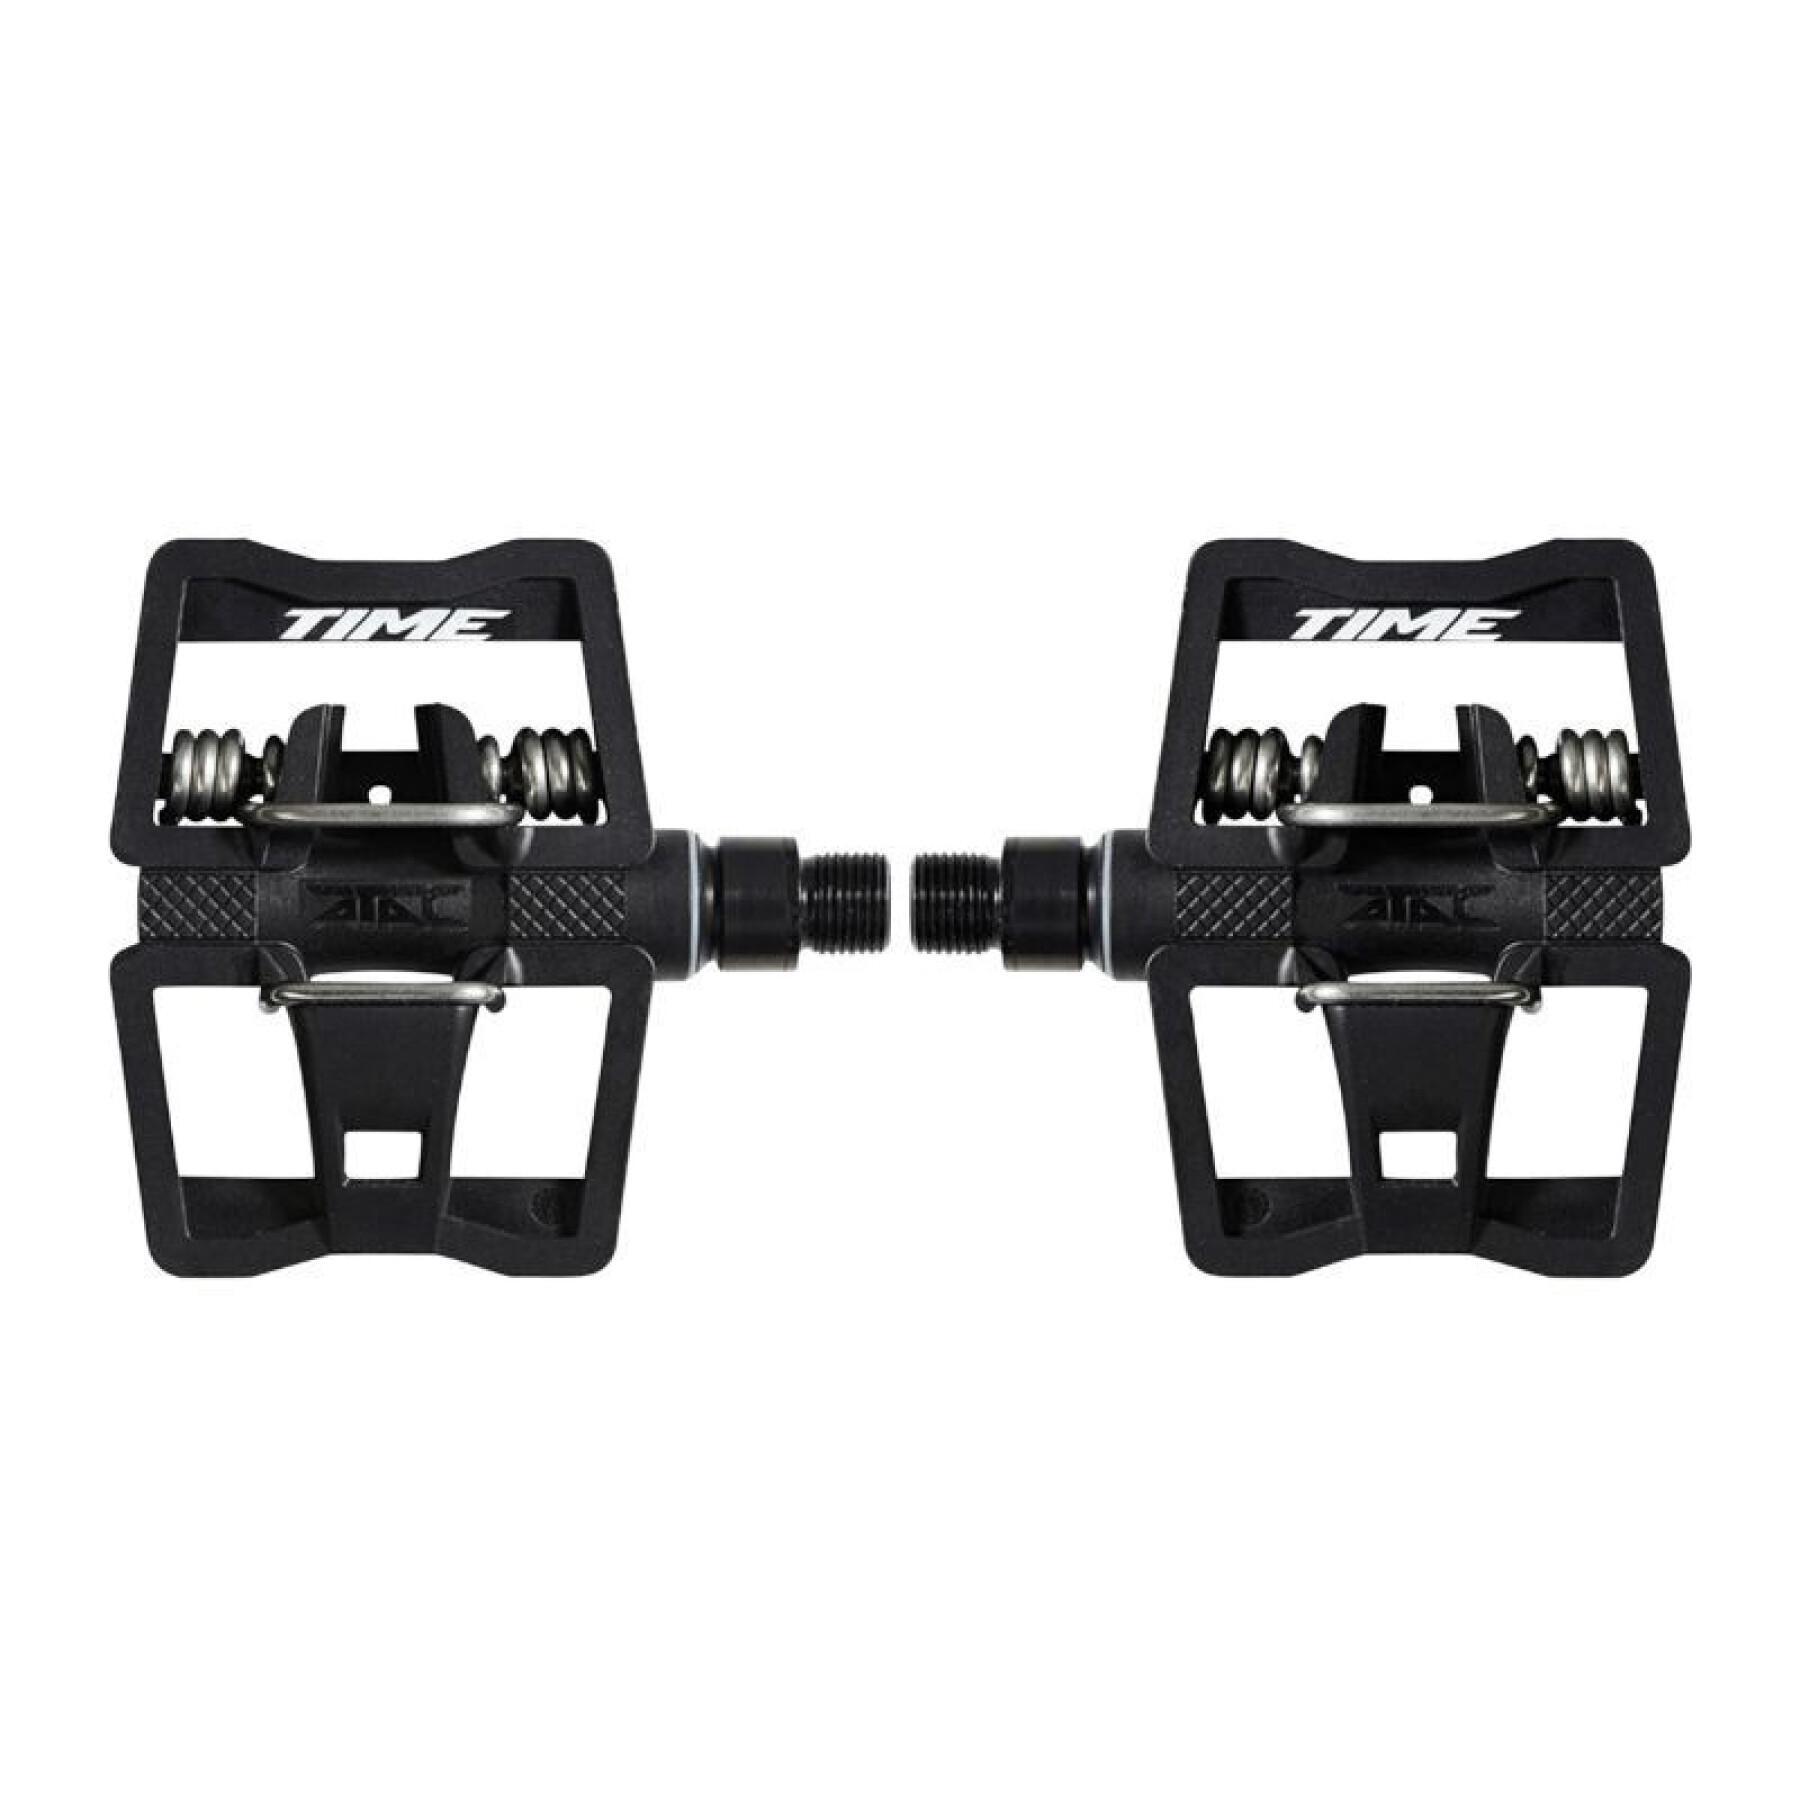 Pedals city-vtt automatic versatile wedges atac one side automatic and one side standard TIME link hybrid